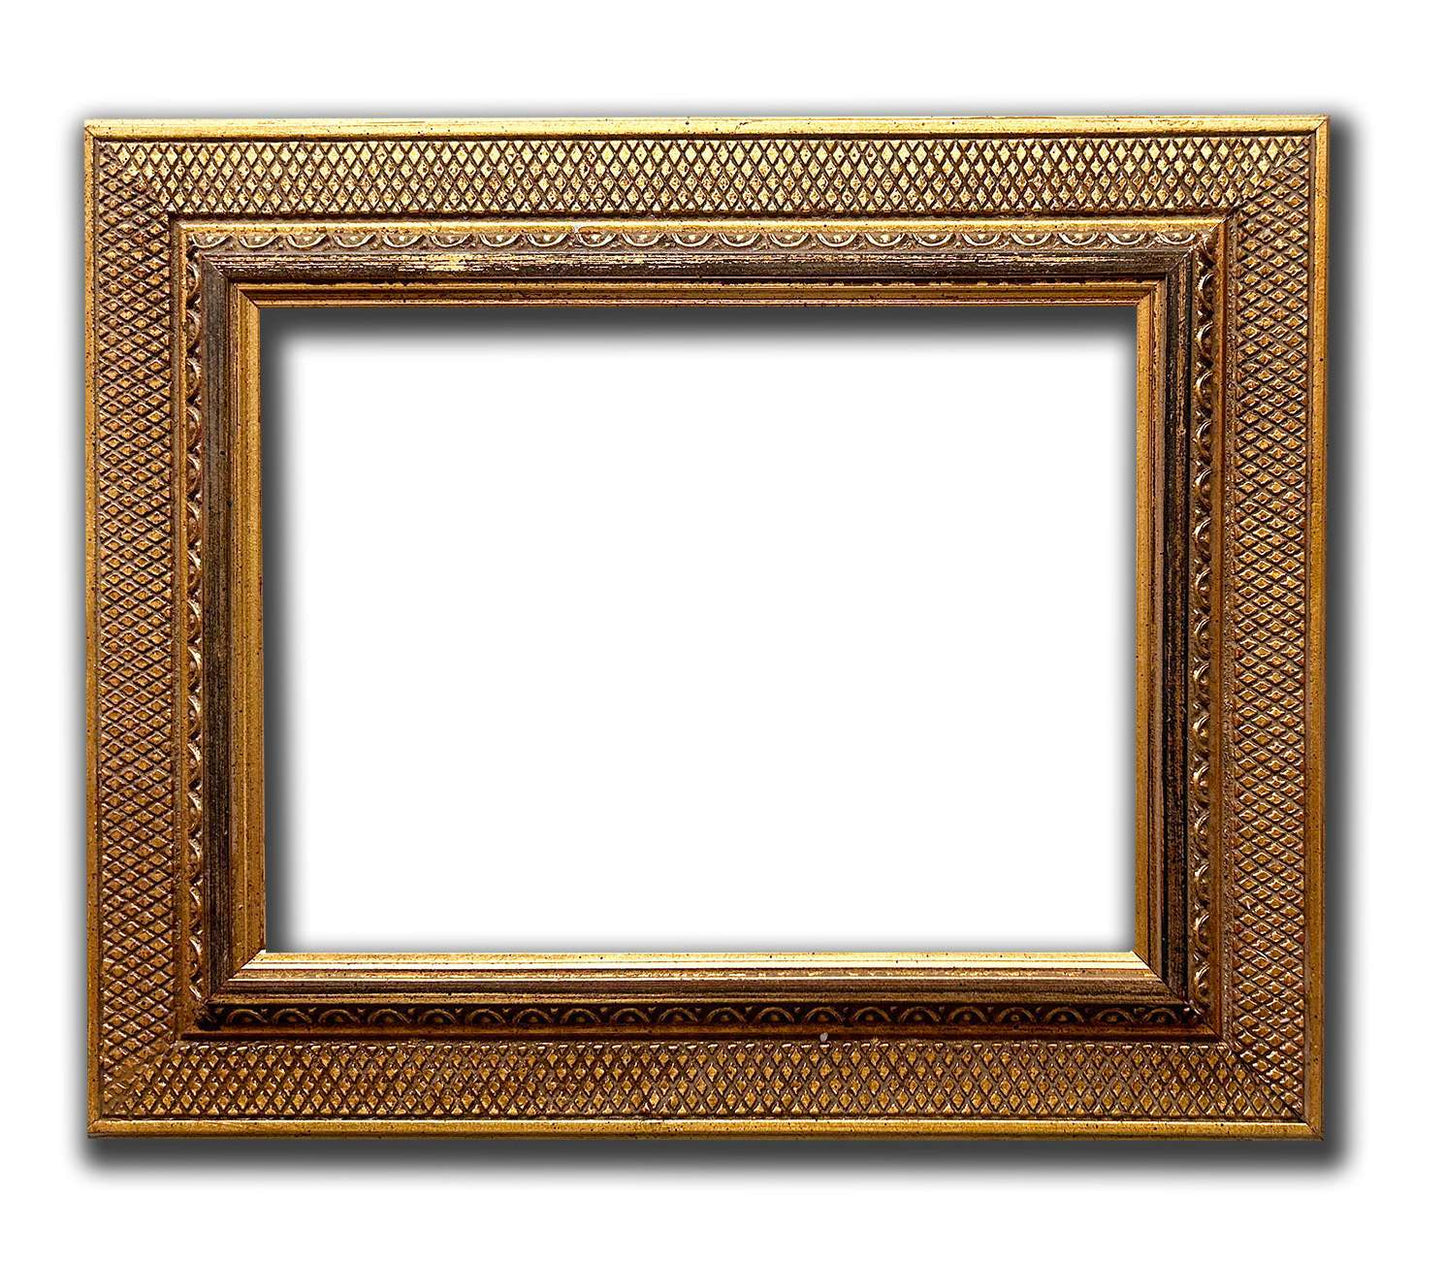 15x20 cm or 6x8 ins, wooden photo frame